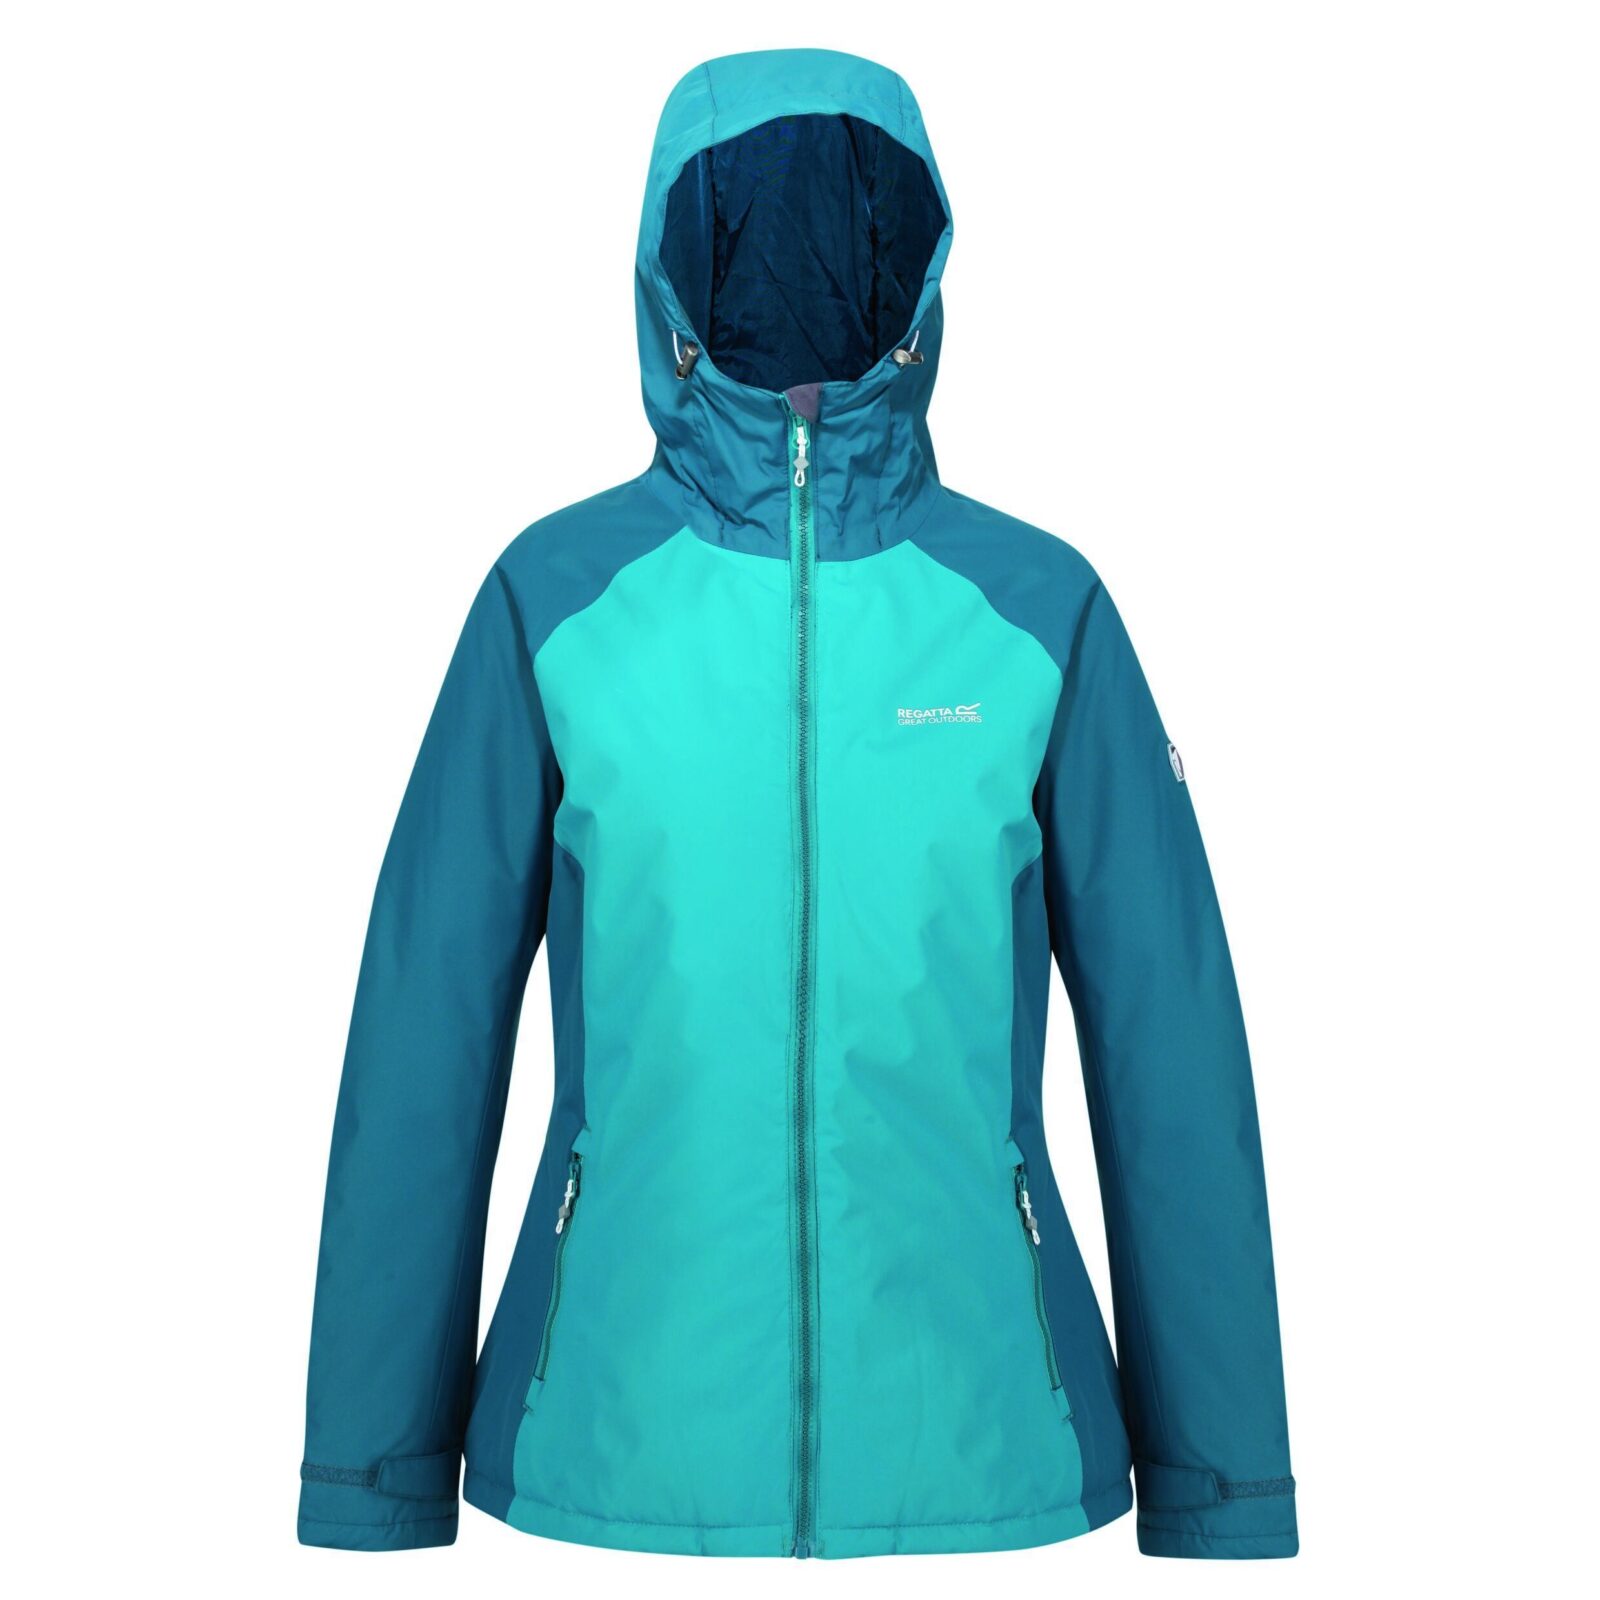 Battery powered heated jackets from Regatta Great Outdoors. The verdict